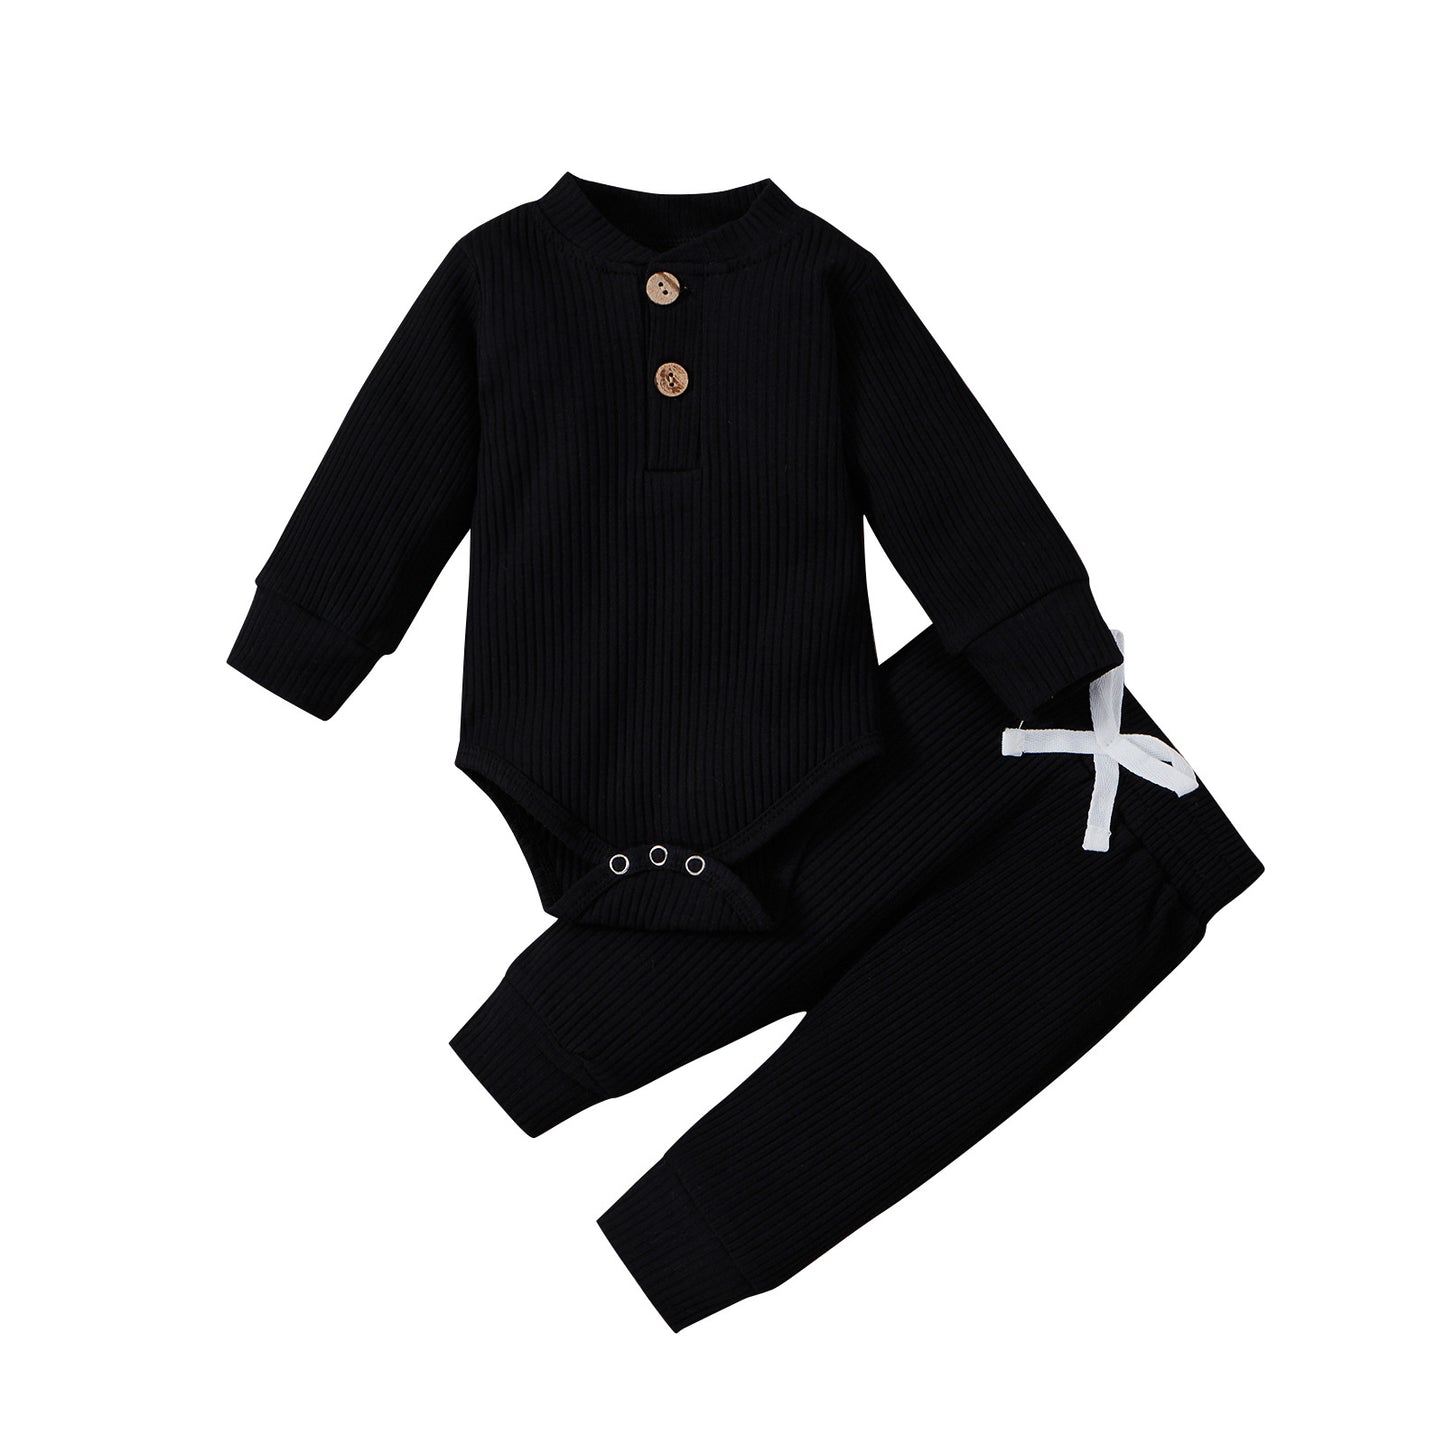 Comfy and Cozy Unisex Baby Toddlers Cotton Long Sleeve Romper and Pants Homewear Set